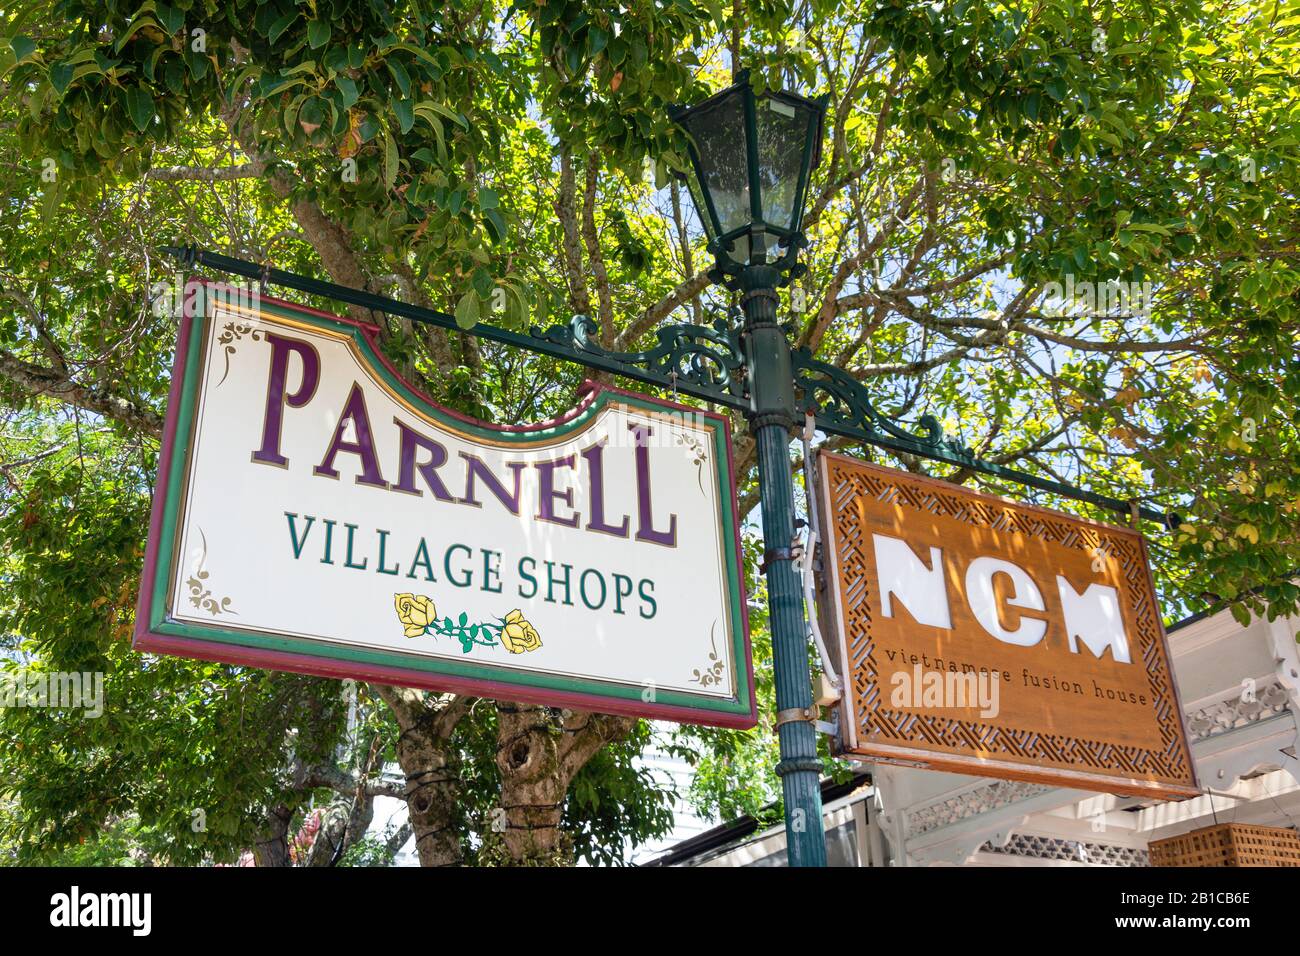 Parnell Village Shops sign, Parnell Road, Parnell, Auckland, Auckland Region, New Zealand Stock Photo